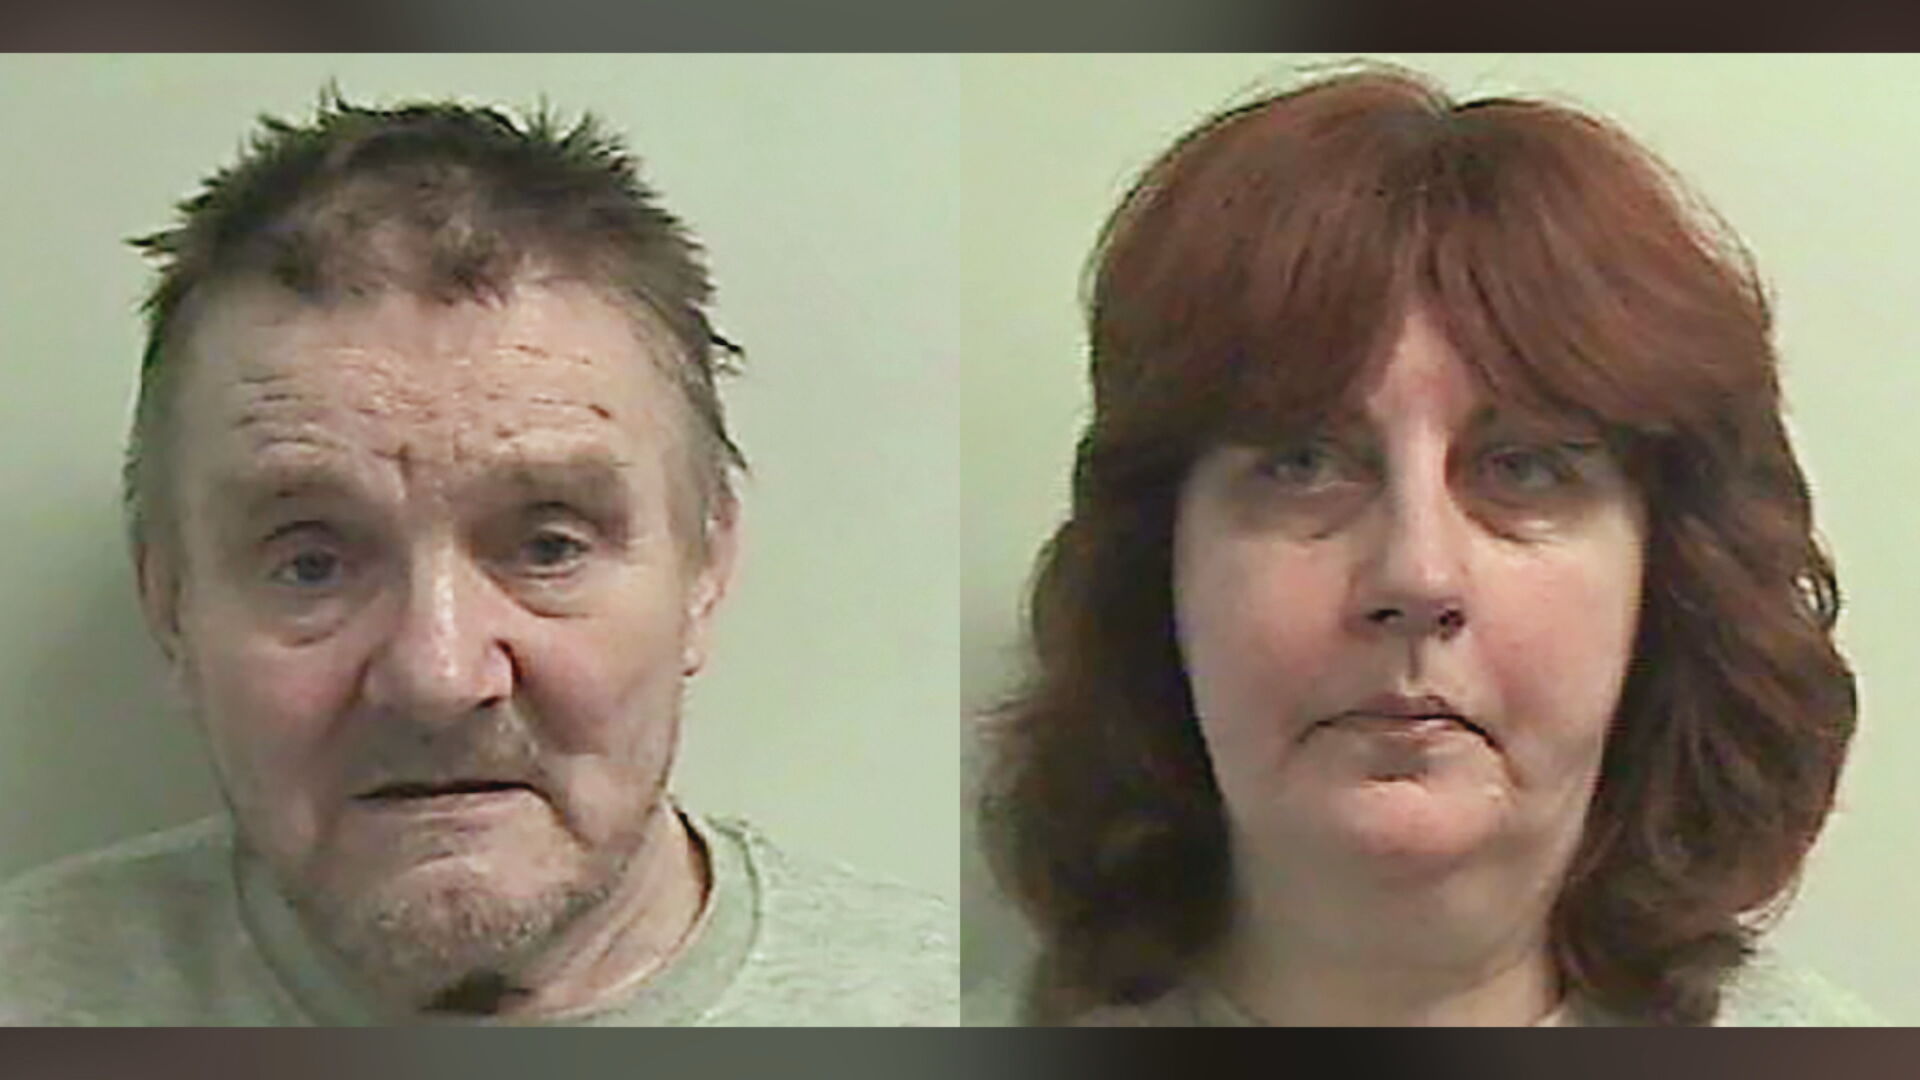 Edward Cairney and Avril Jones were found guilty of killing Margaret Fleming.